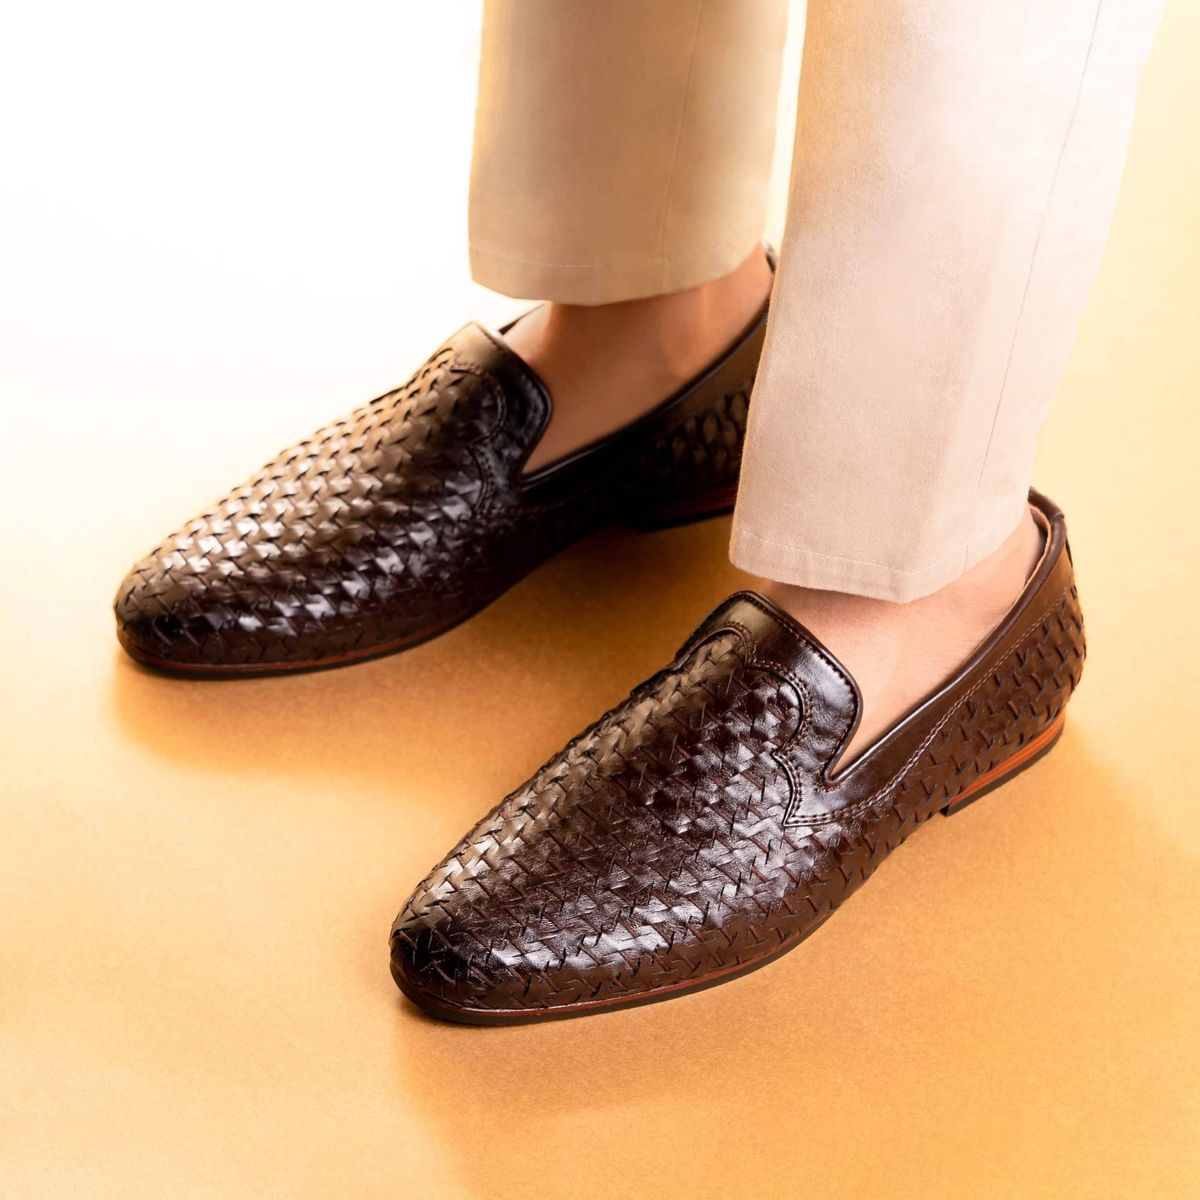 Trigon Braided Loafer in Leather & Yarn Image